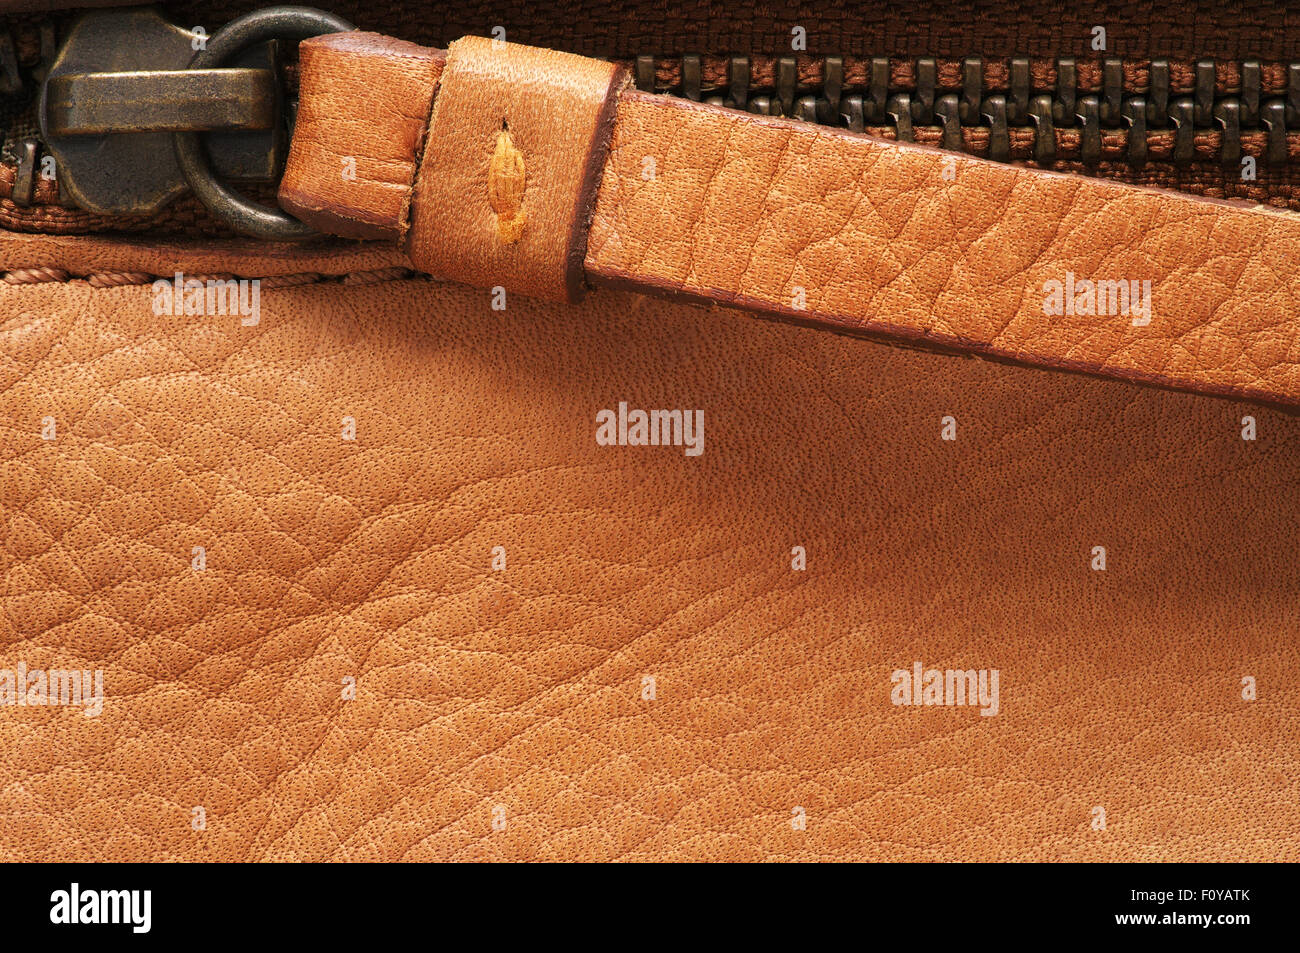 Zip on leather, close-up Stock Photo